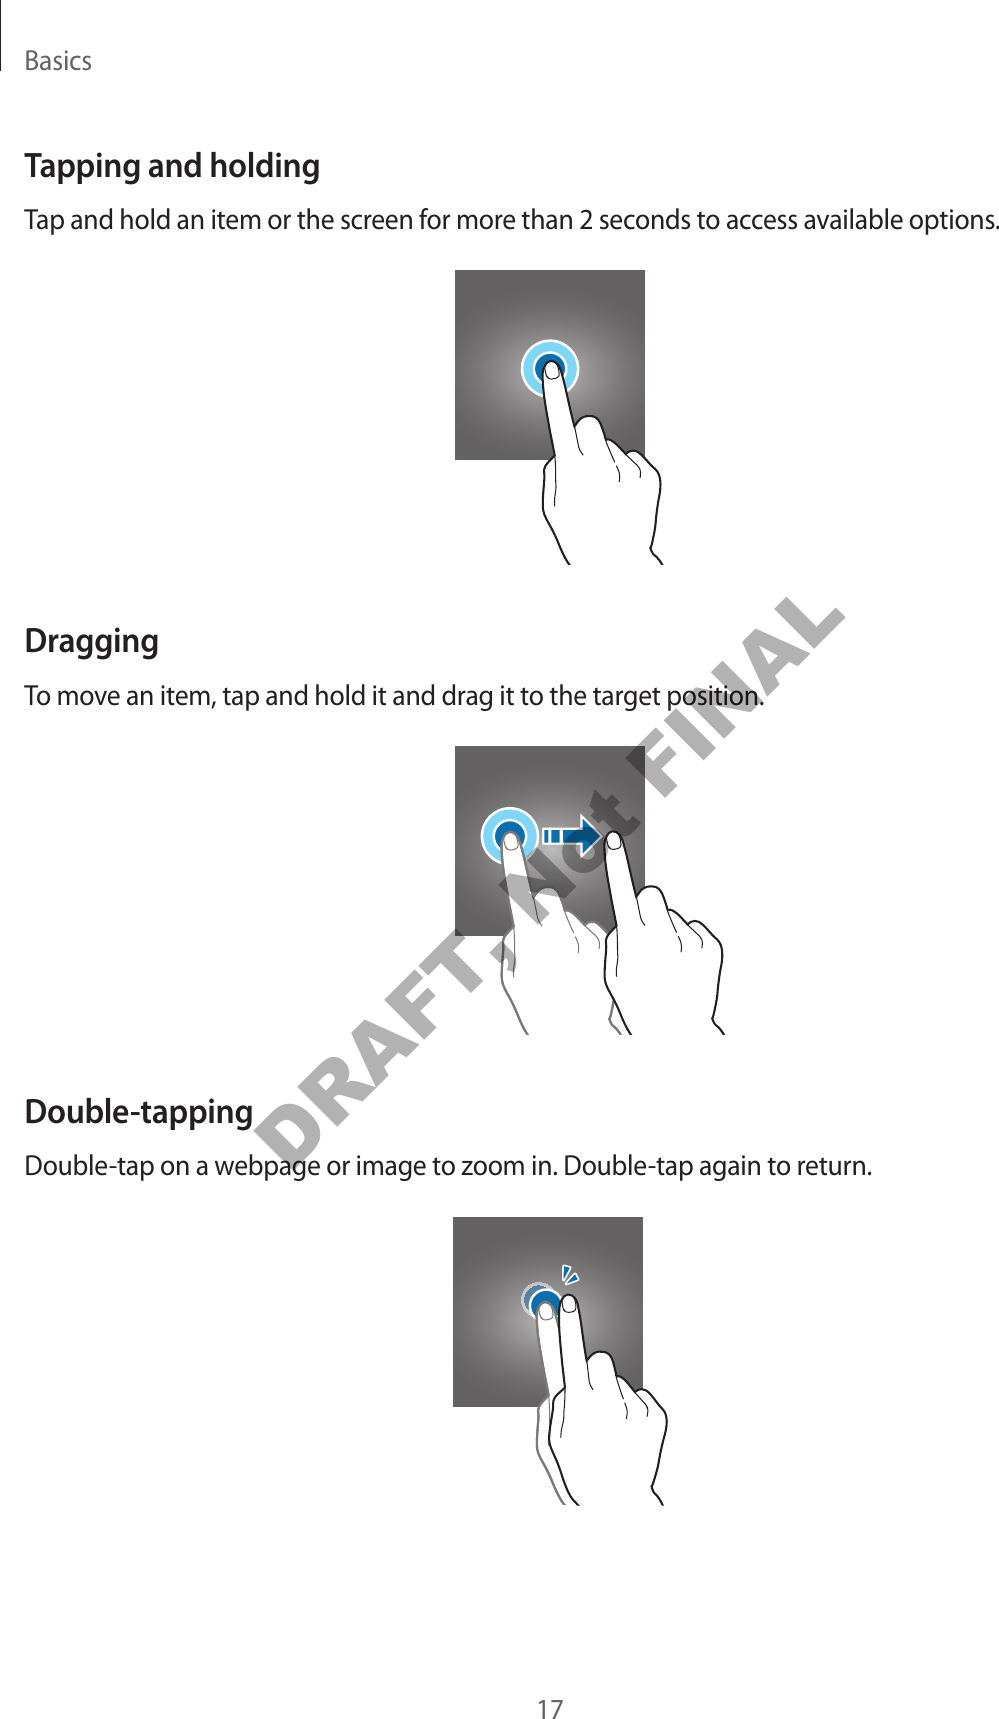 Basics17Tapping and holdingTap and hold an item or the screen for more than 2 seconds to access available options.DraggingTo move an item, tap and hold it and drag it to the target position.Double-tappingDouble-tap on a webpage or image to zoom in. Double-tap again to return.DRAFT, Not FINAL